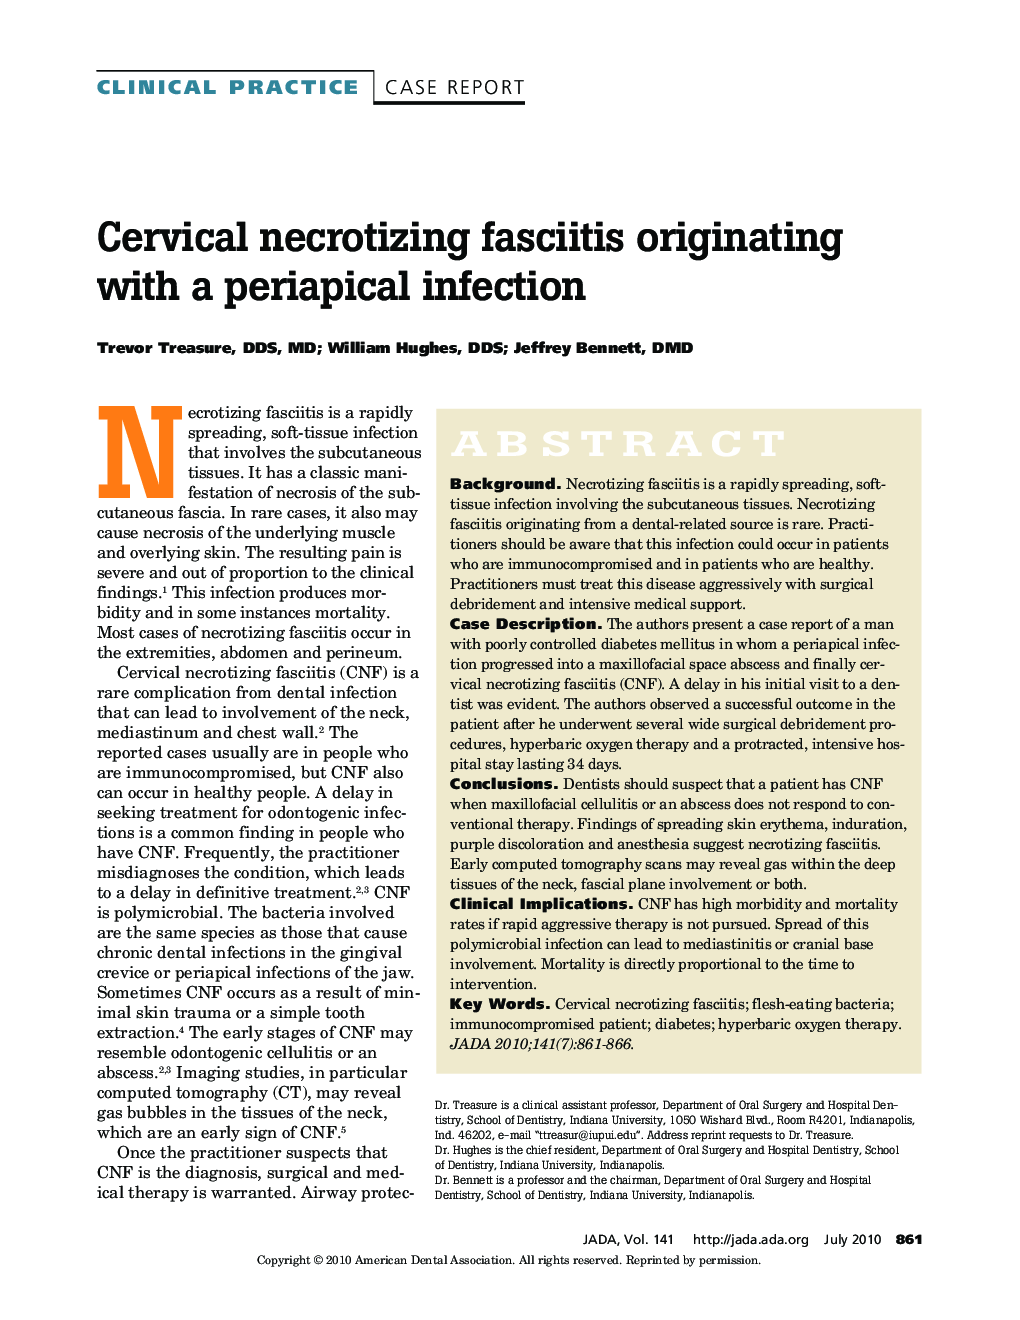 Cervical necrotizing fasciitis originating with a periapical infection 